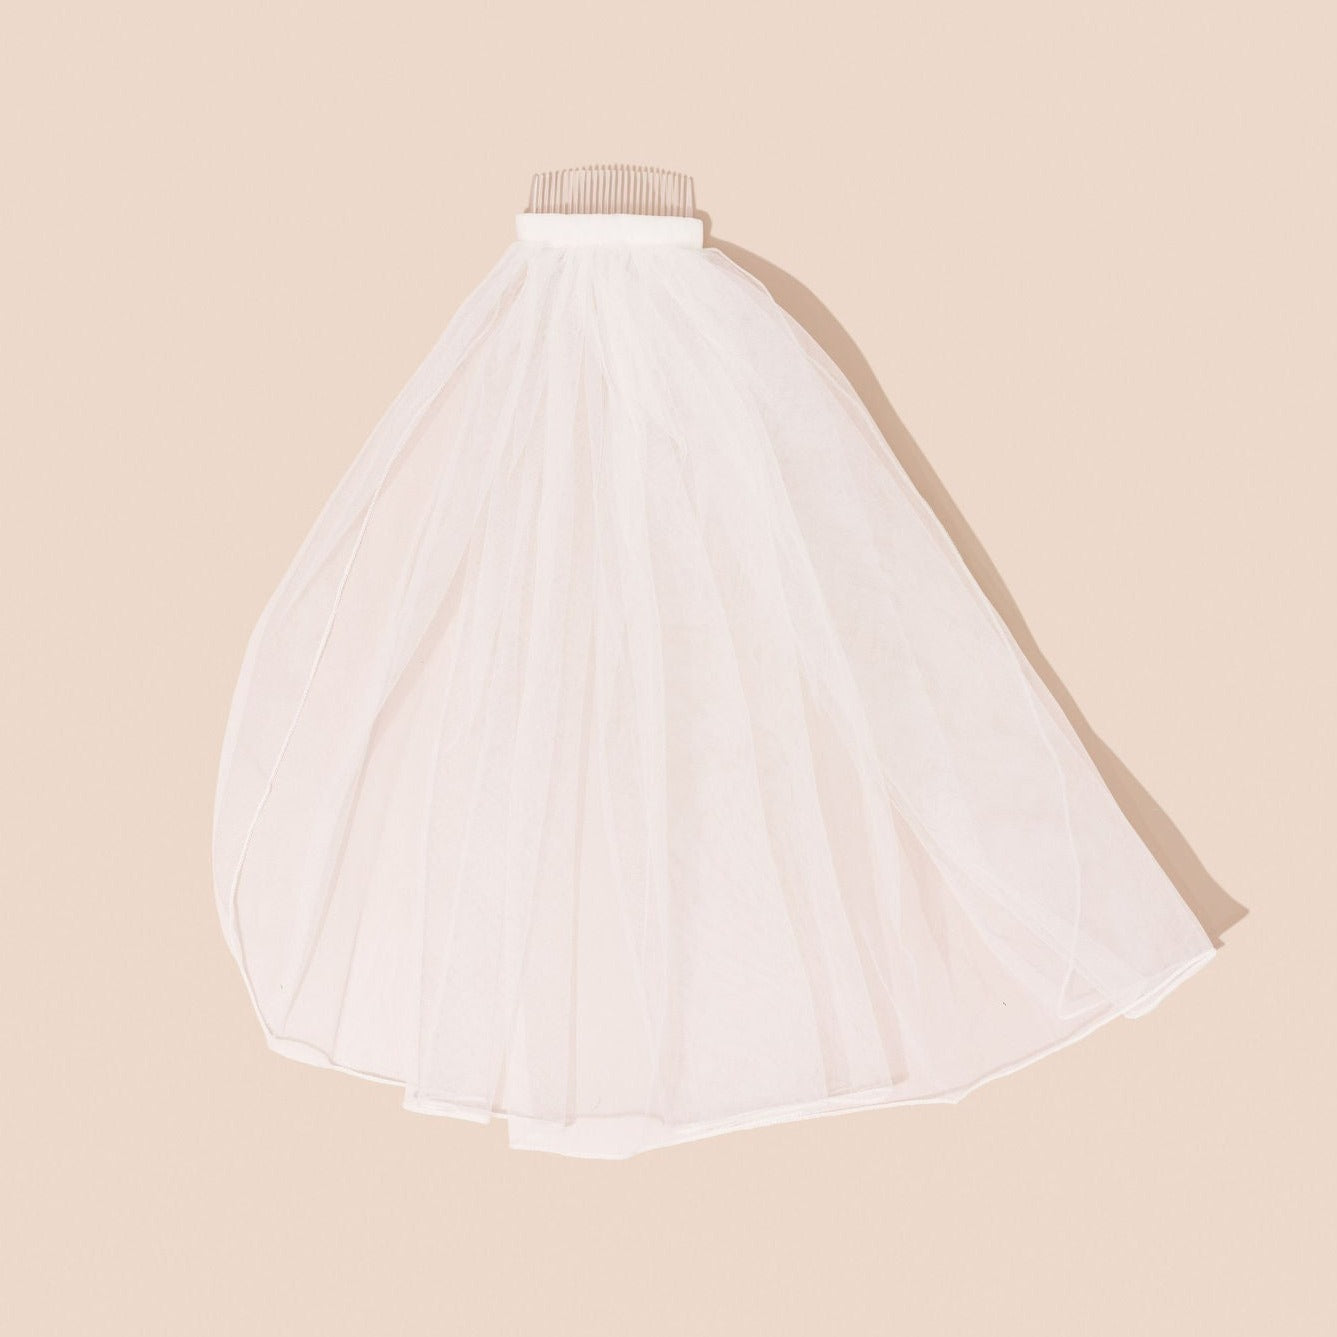 One layer, bunched tulle veil with pencil edge trim (60cm)